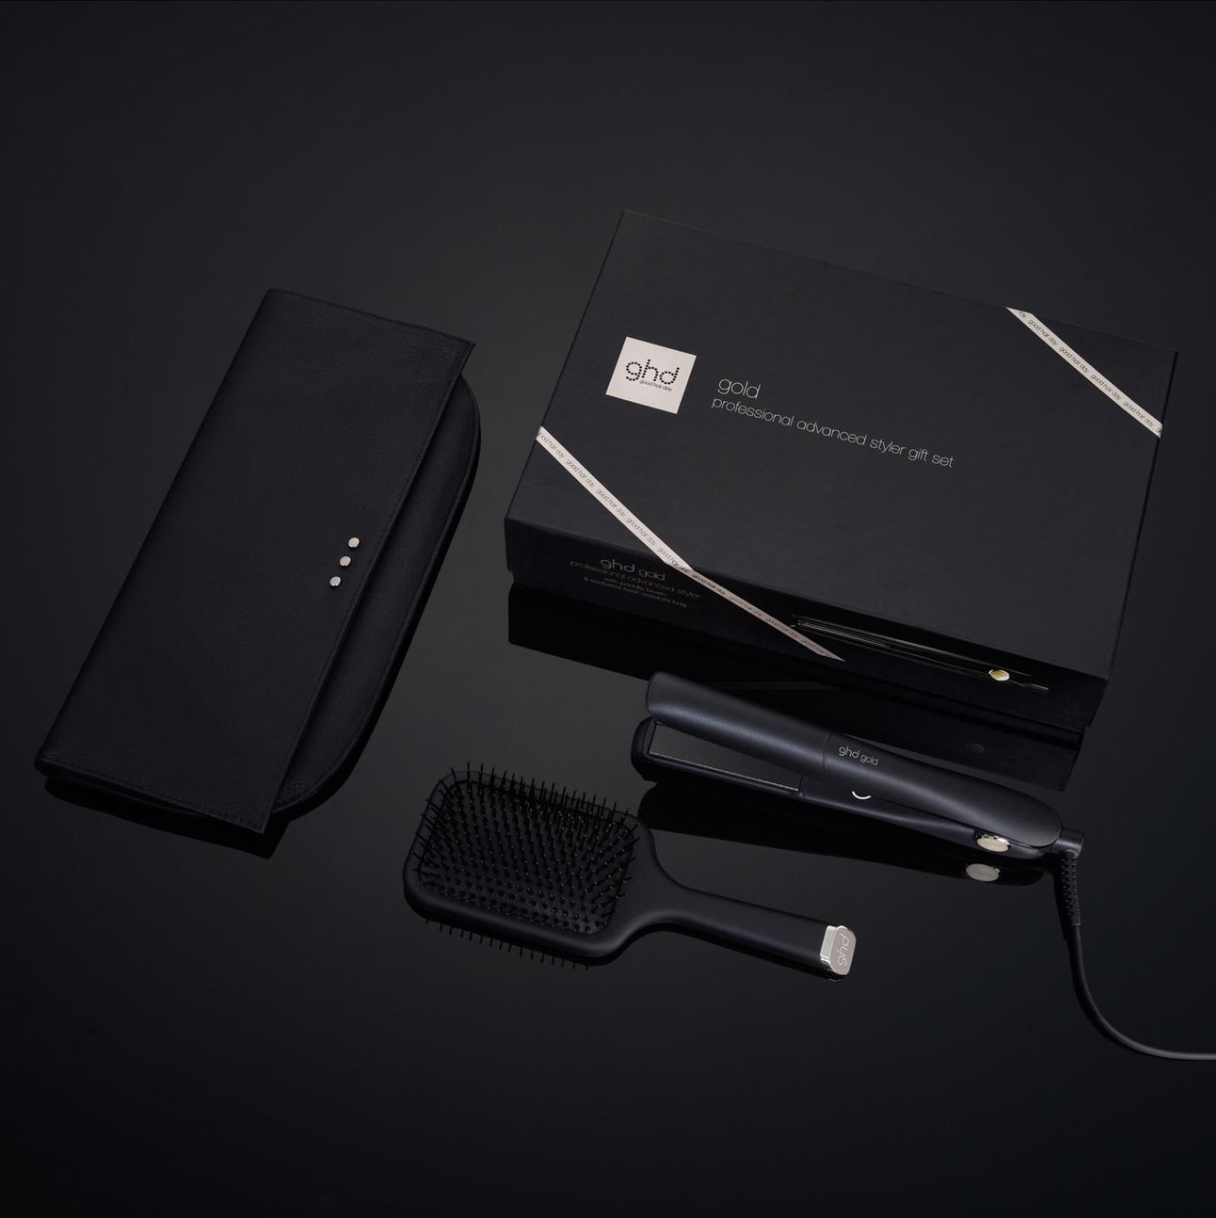 Free Gift with GHD Limited Edition Electrical Items